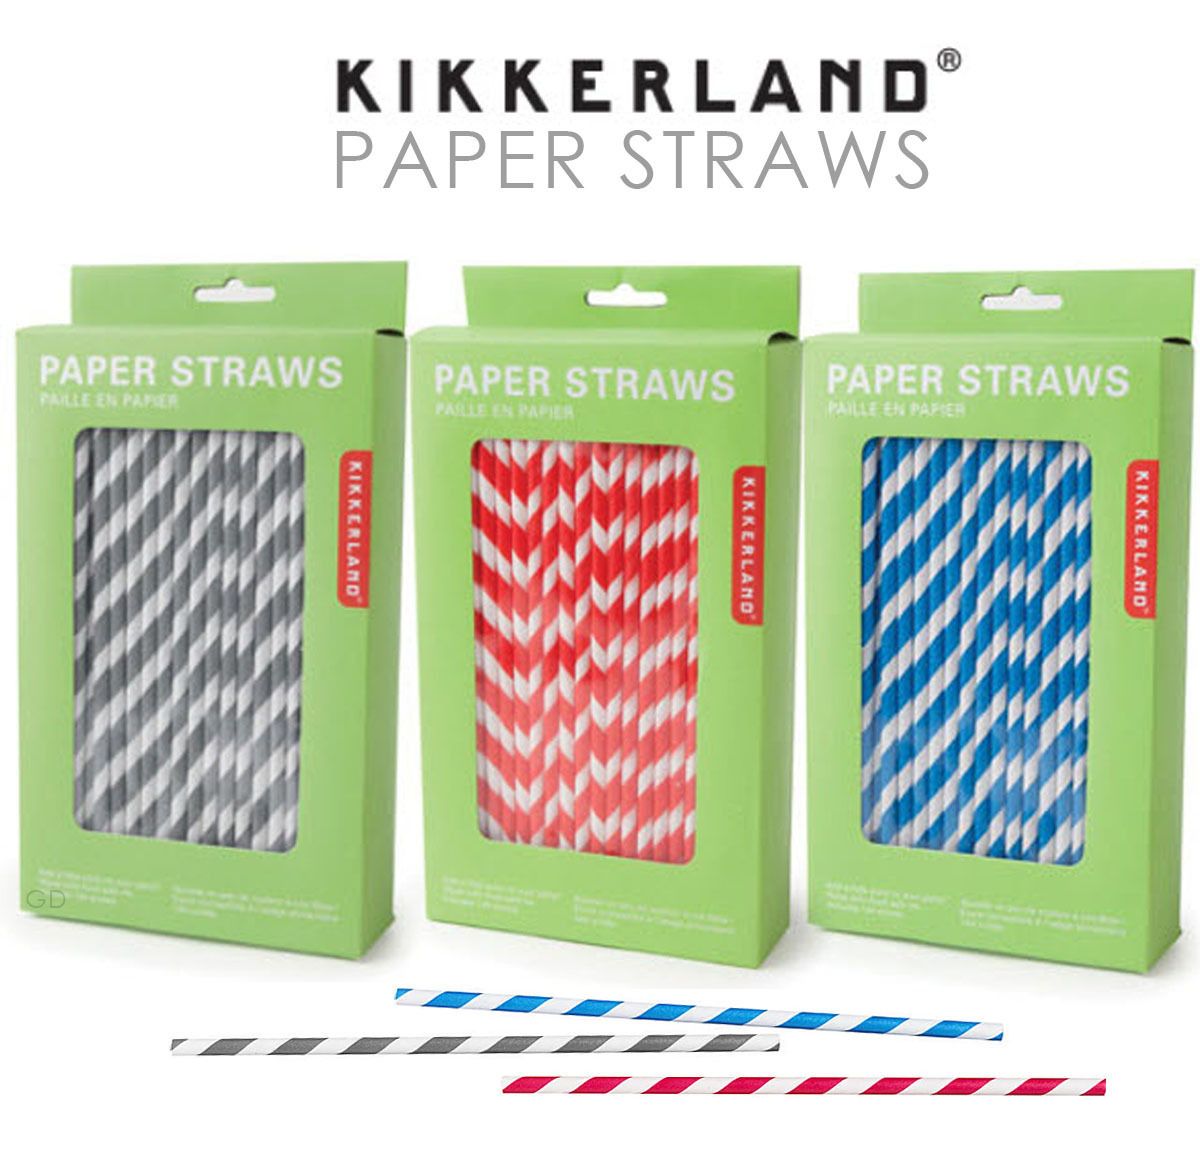 144 Classic Paper Straws Blue or Red Striped Drink Box Biodegradable